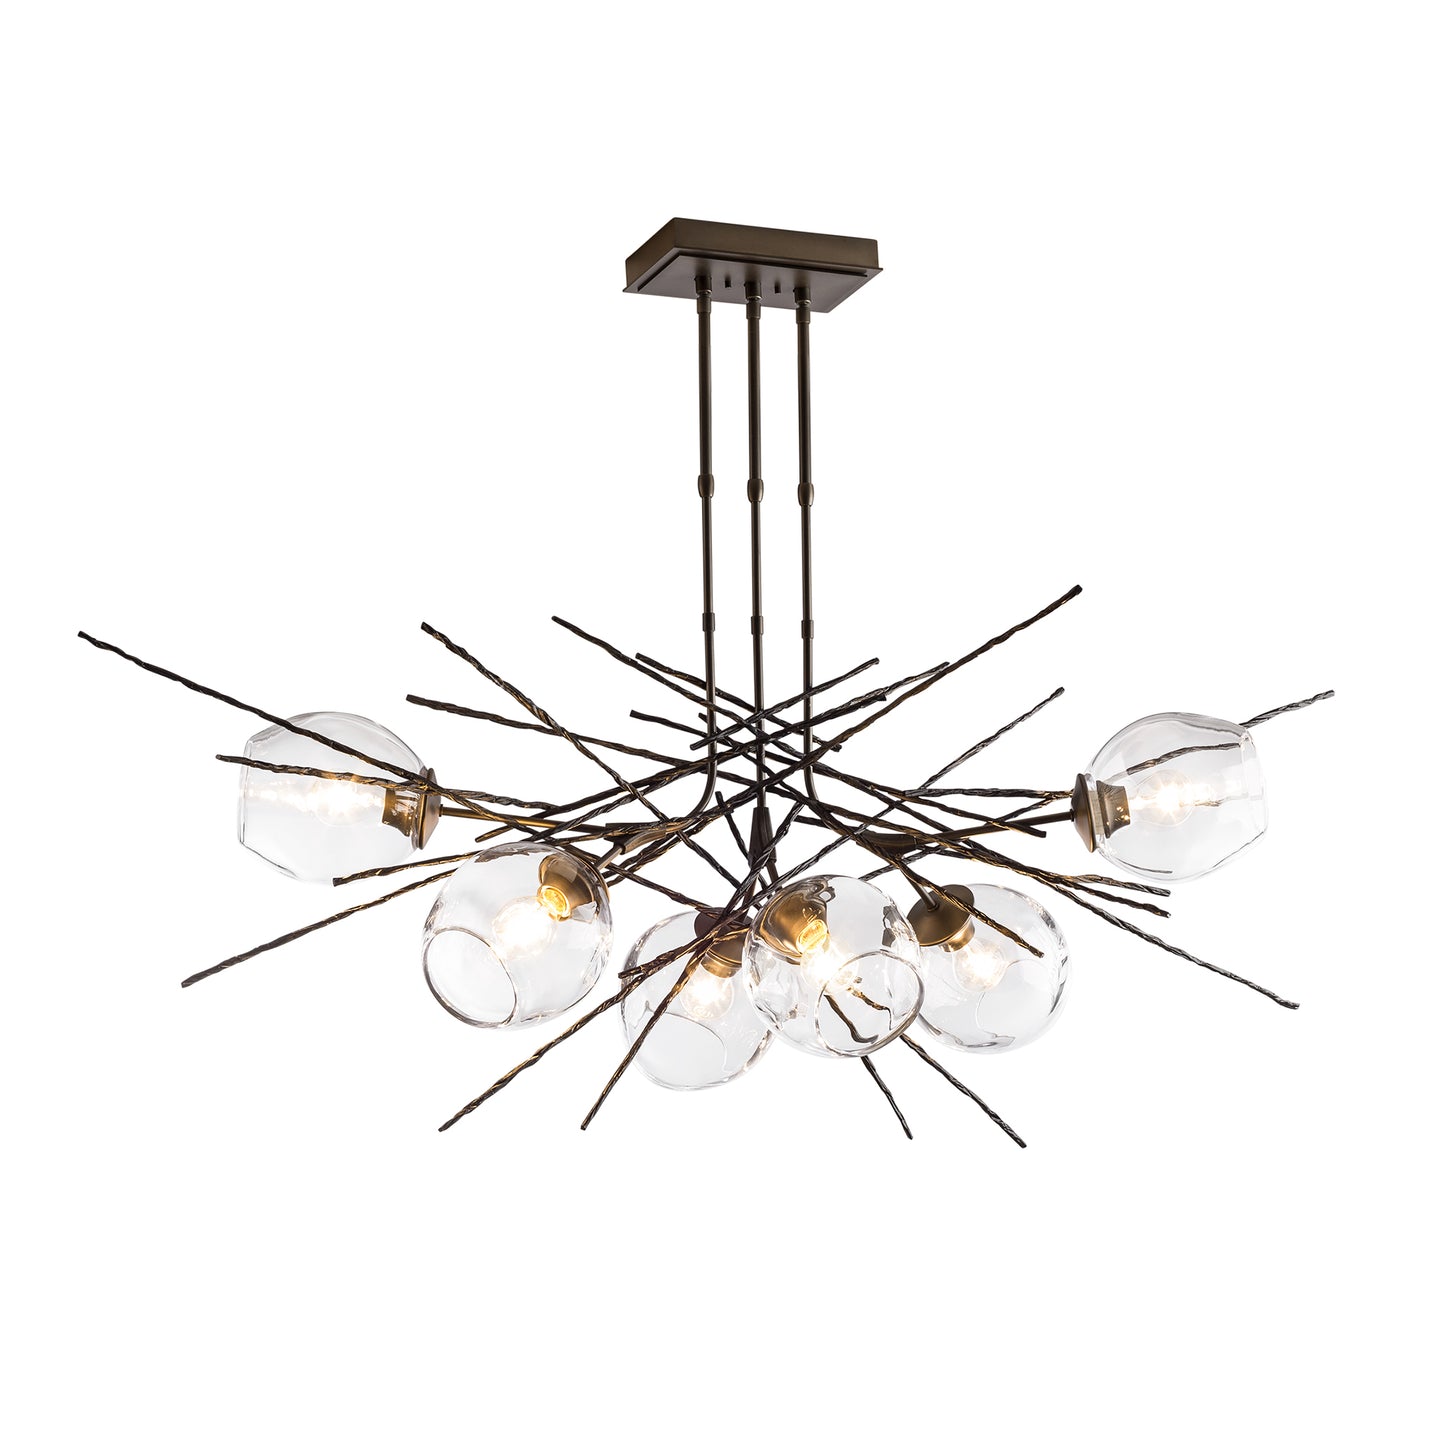 A modern chandelier with Hubbardton Forge's Griffin Pendant and glass balls hanging from it.